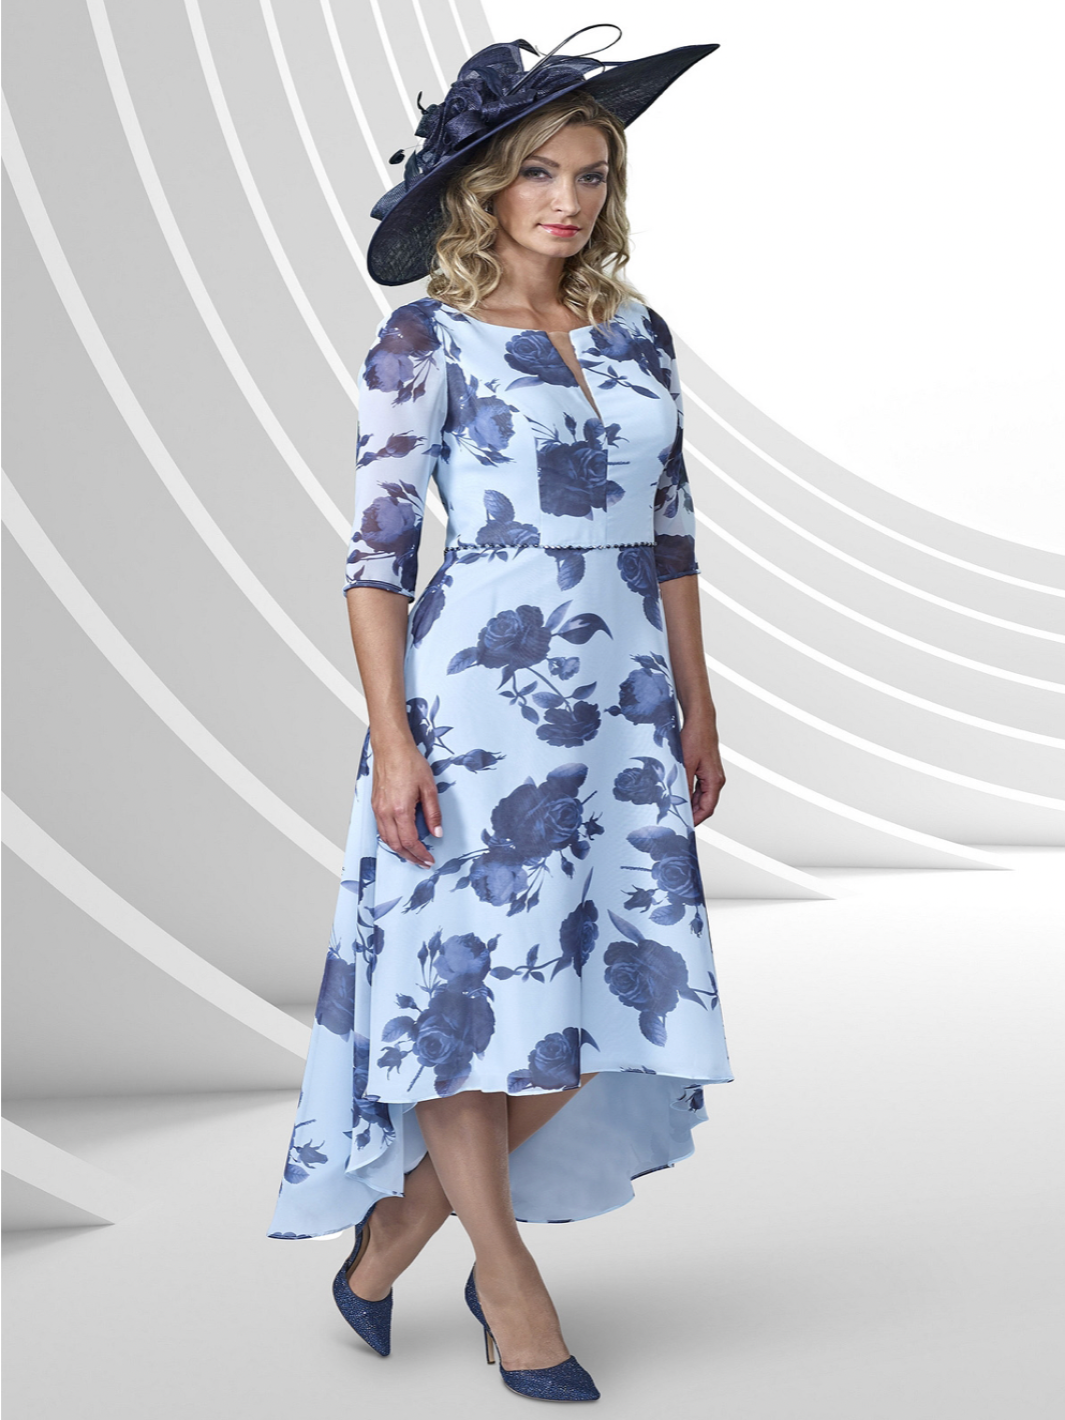 Veromia V08144 - Baby Blue / Navy-Mother of the bride- mother of the groom -Nicola Ross